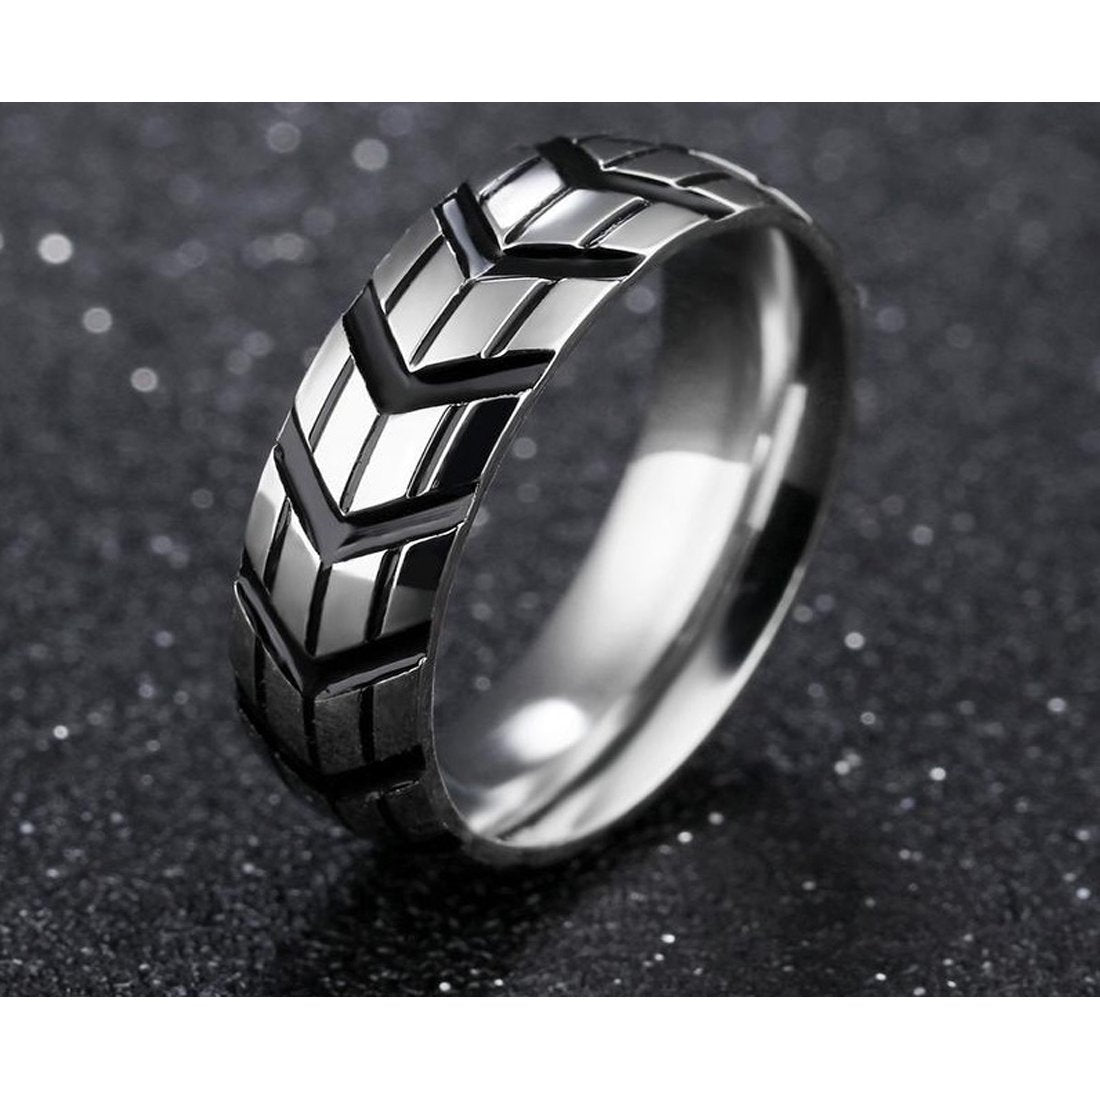 Yellow Chimes Rings for Men Western Style Stainless Steel band designed Contemporary Ring for Men and Boys